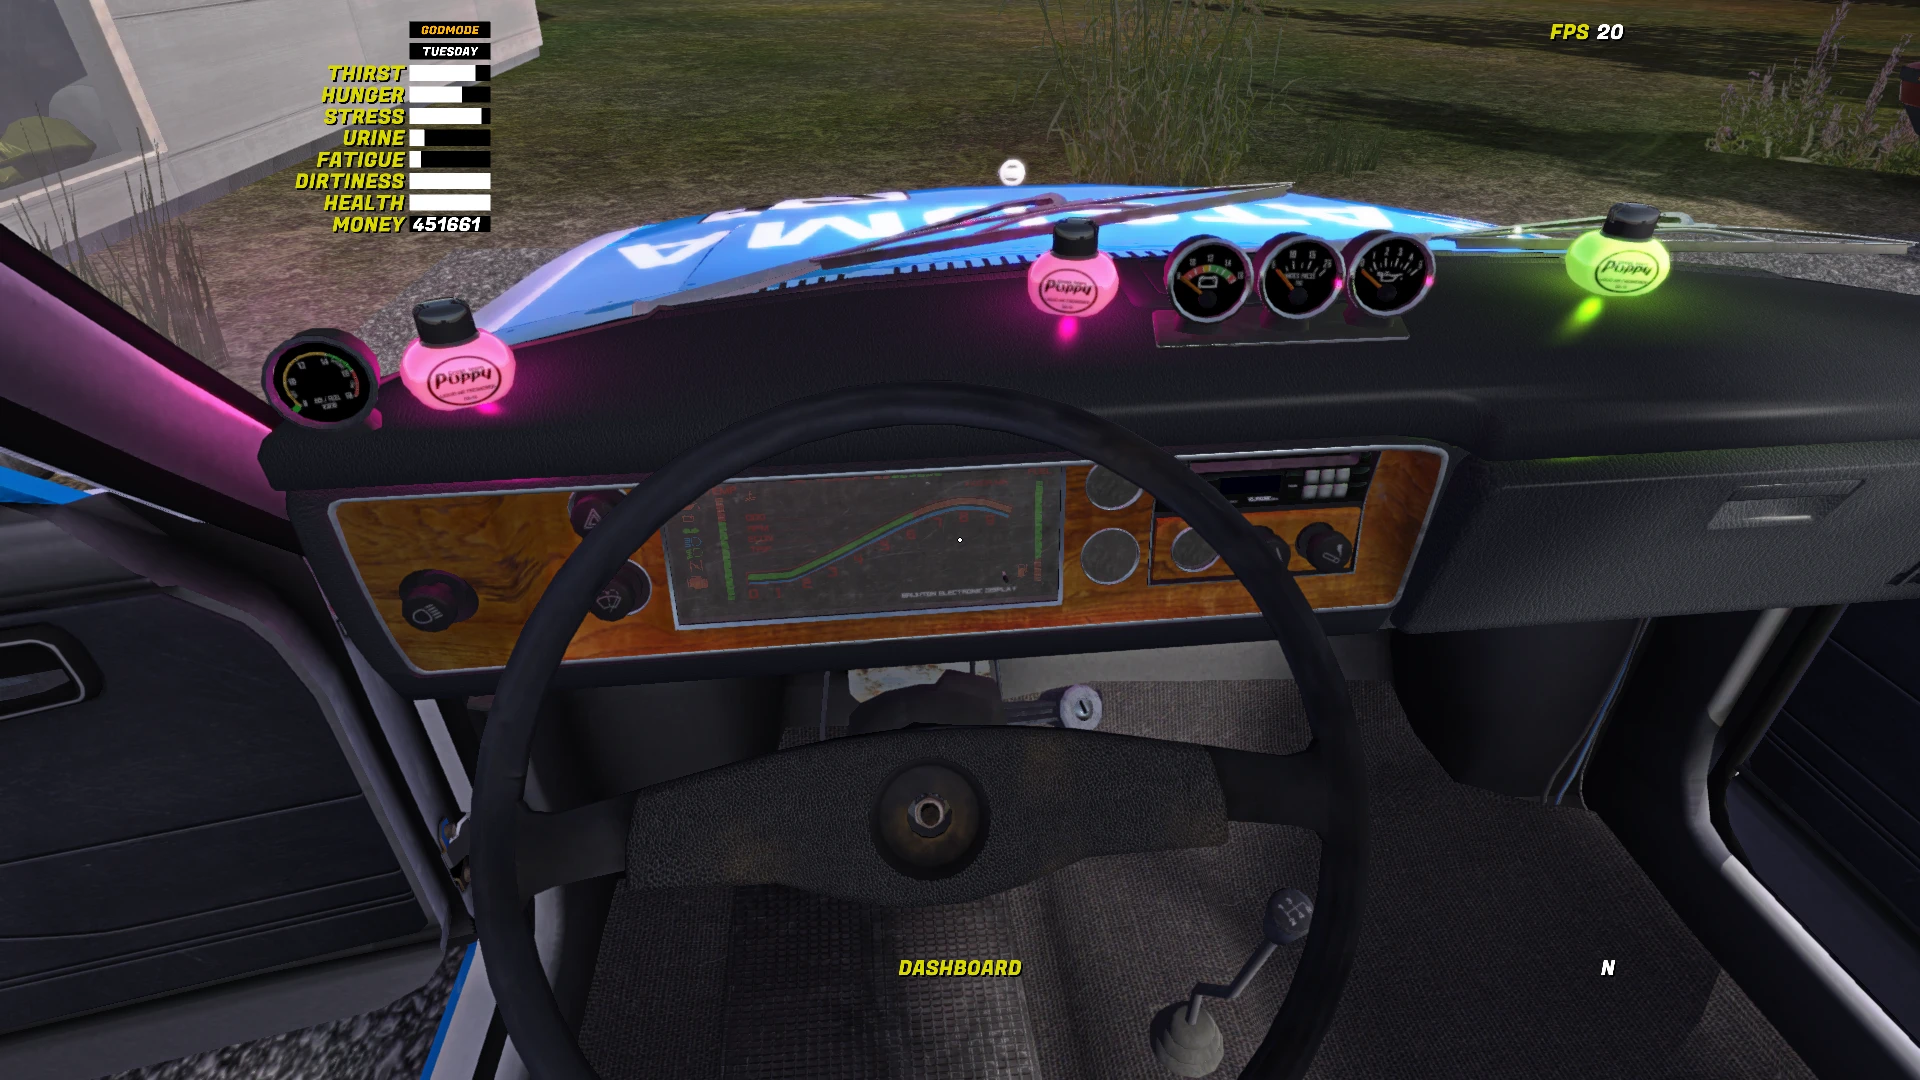 My terrible savegame 2 at My Summer Car Nexus - Mods and community